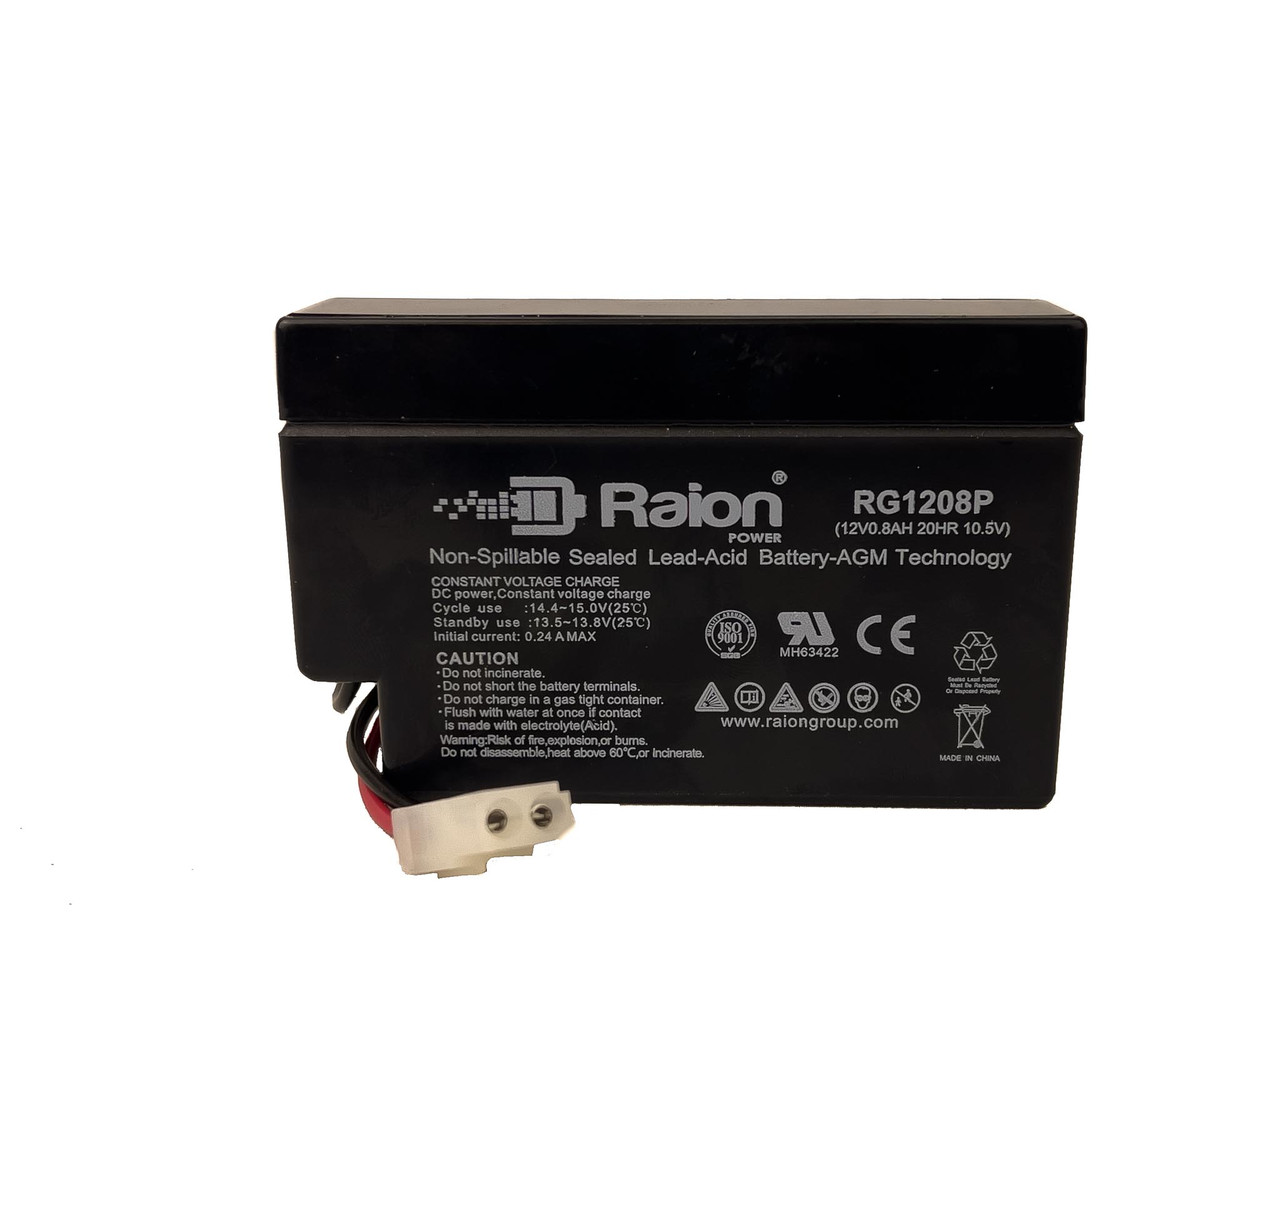 Raion Power 12V 0.8Ah SLA Battery With T1 Terminals For Ademco 7720BT